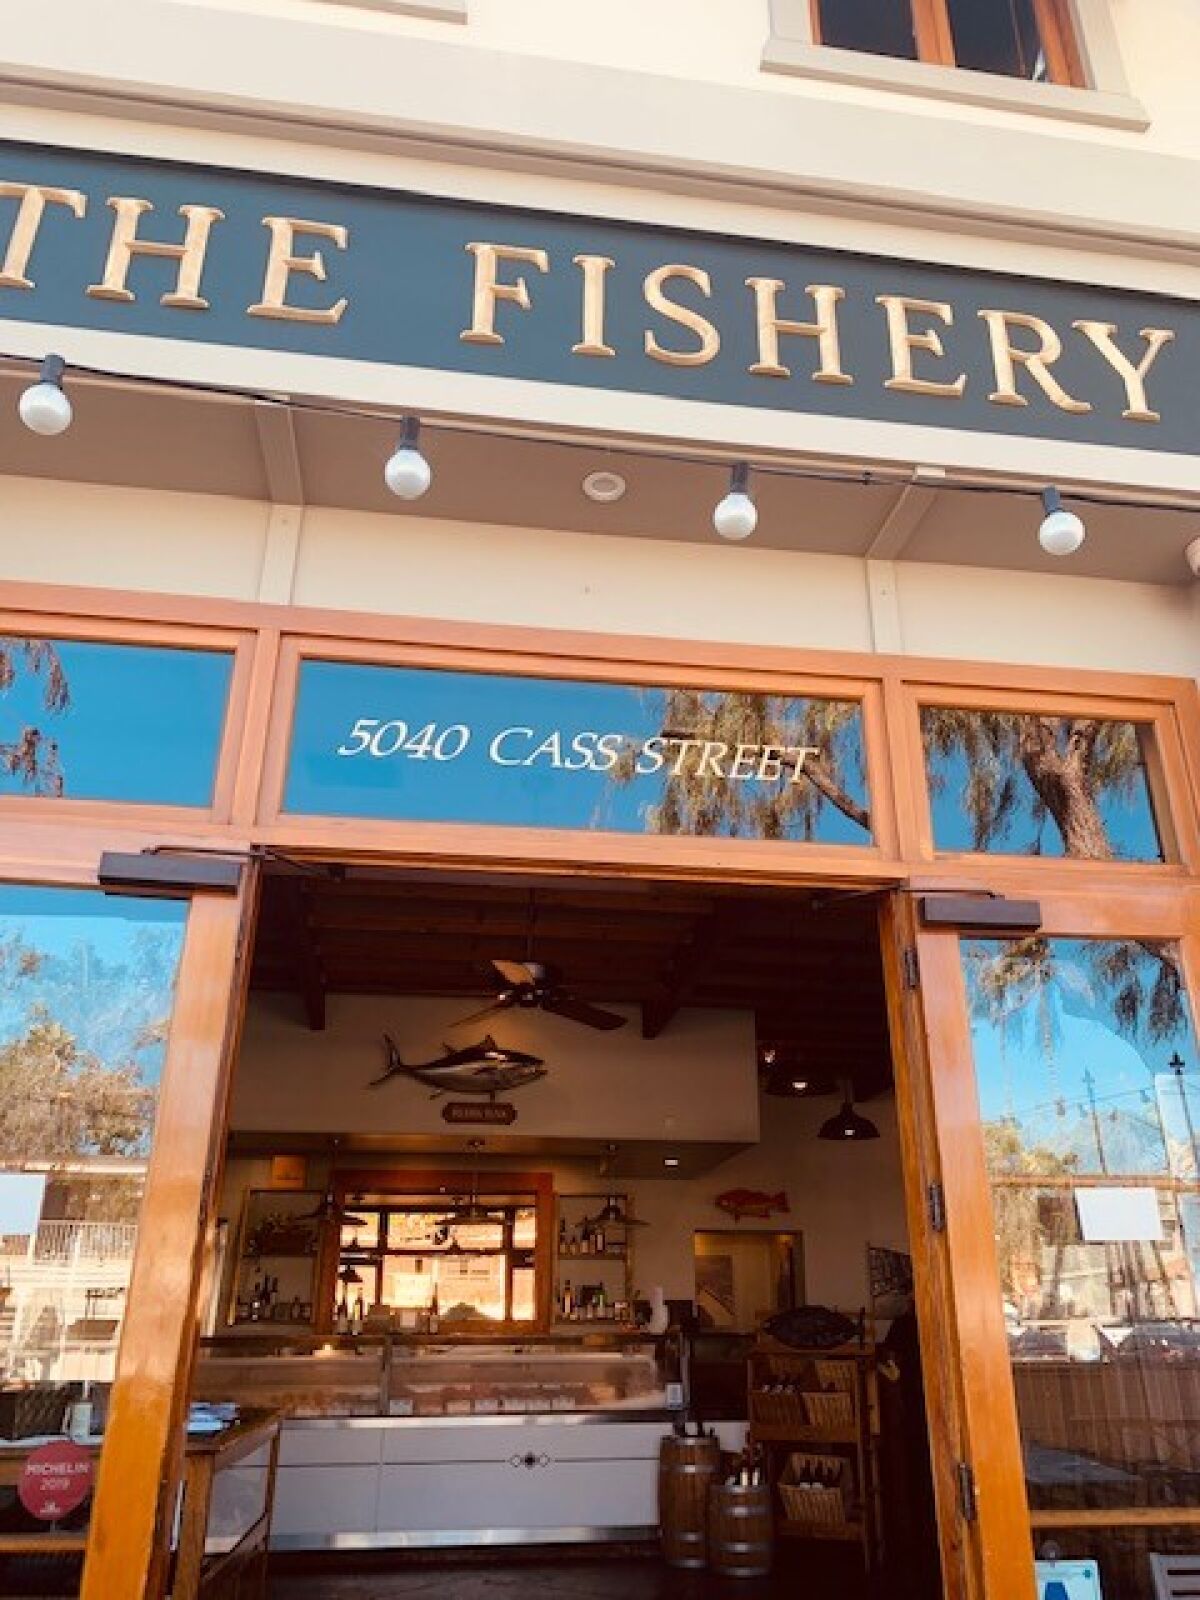 The Fishery has been a longstanding fixture at 5040 Cass St. in Pacific Beach.